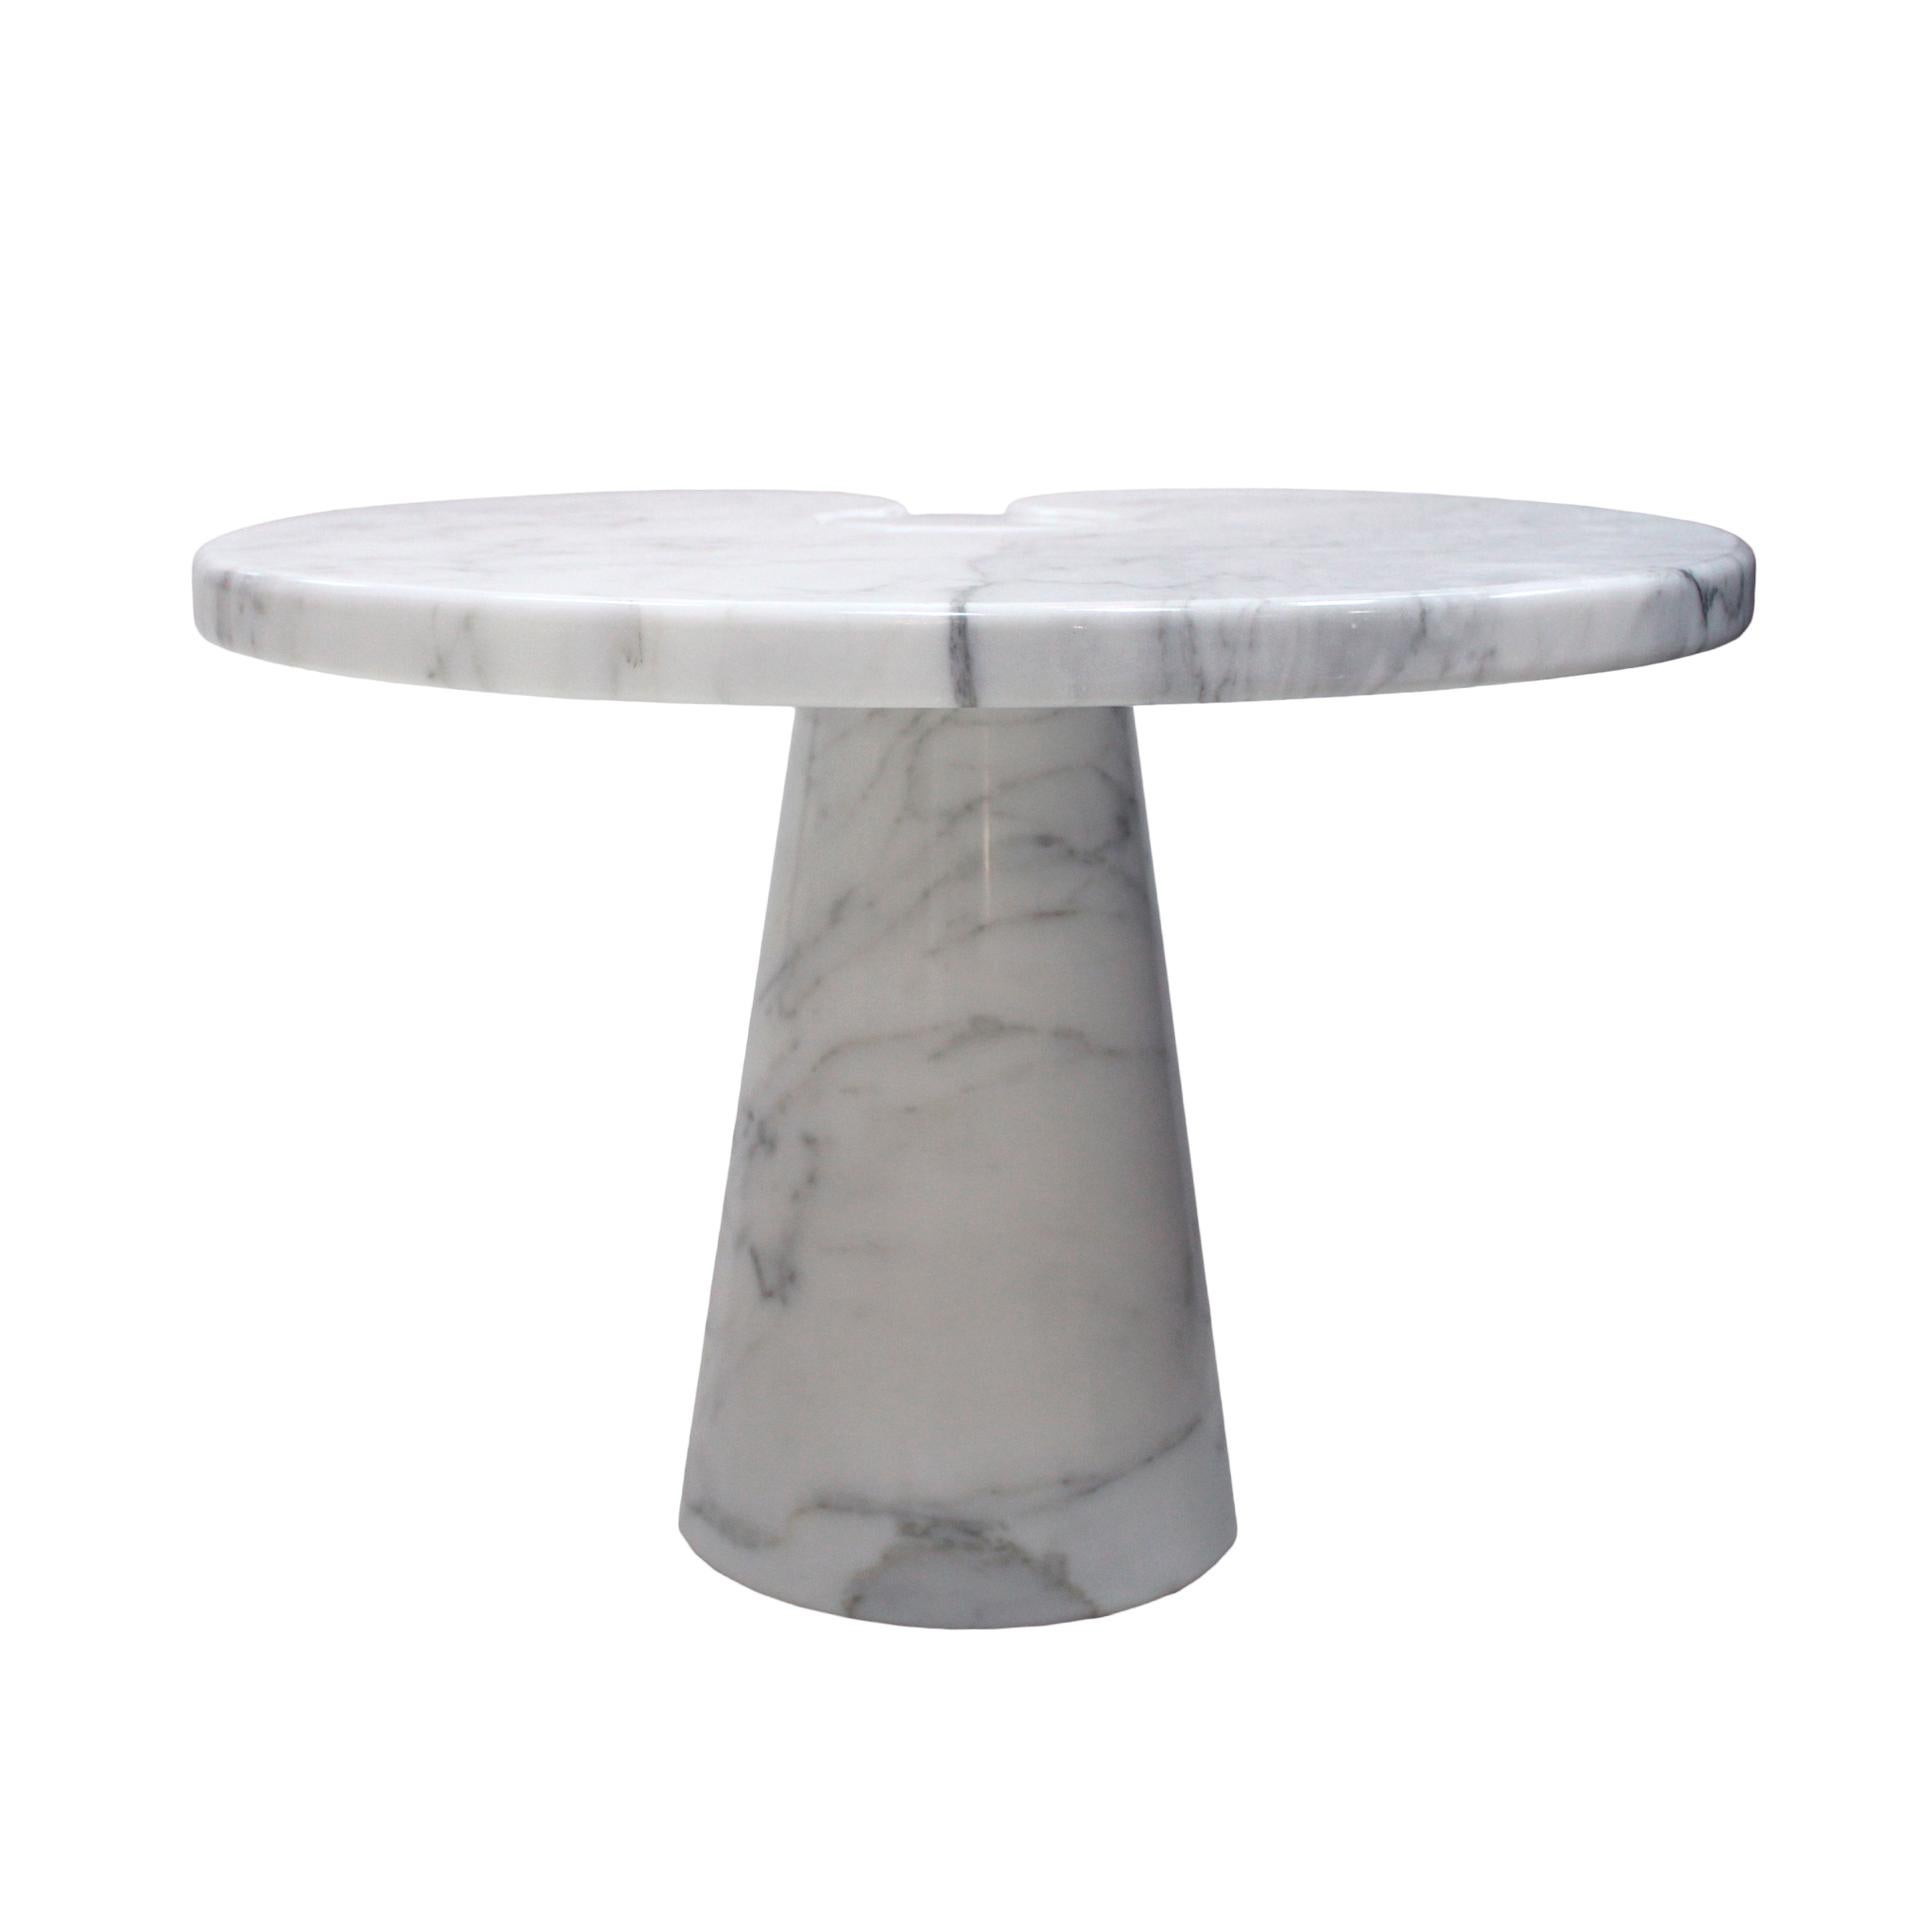 Arabescato marble side table designed by Angelo Mangiarotti. The table belong to the 